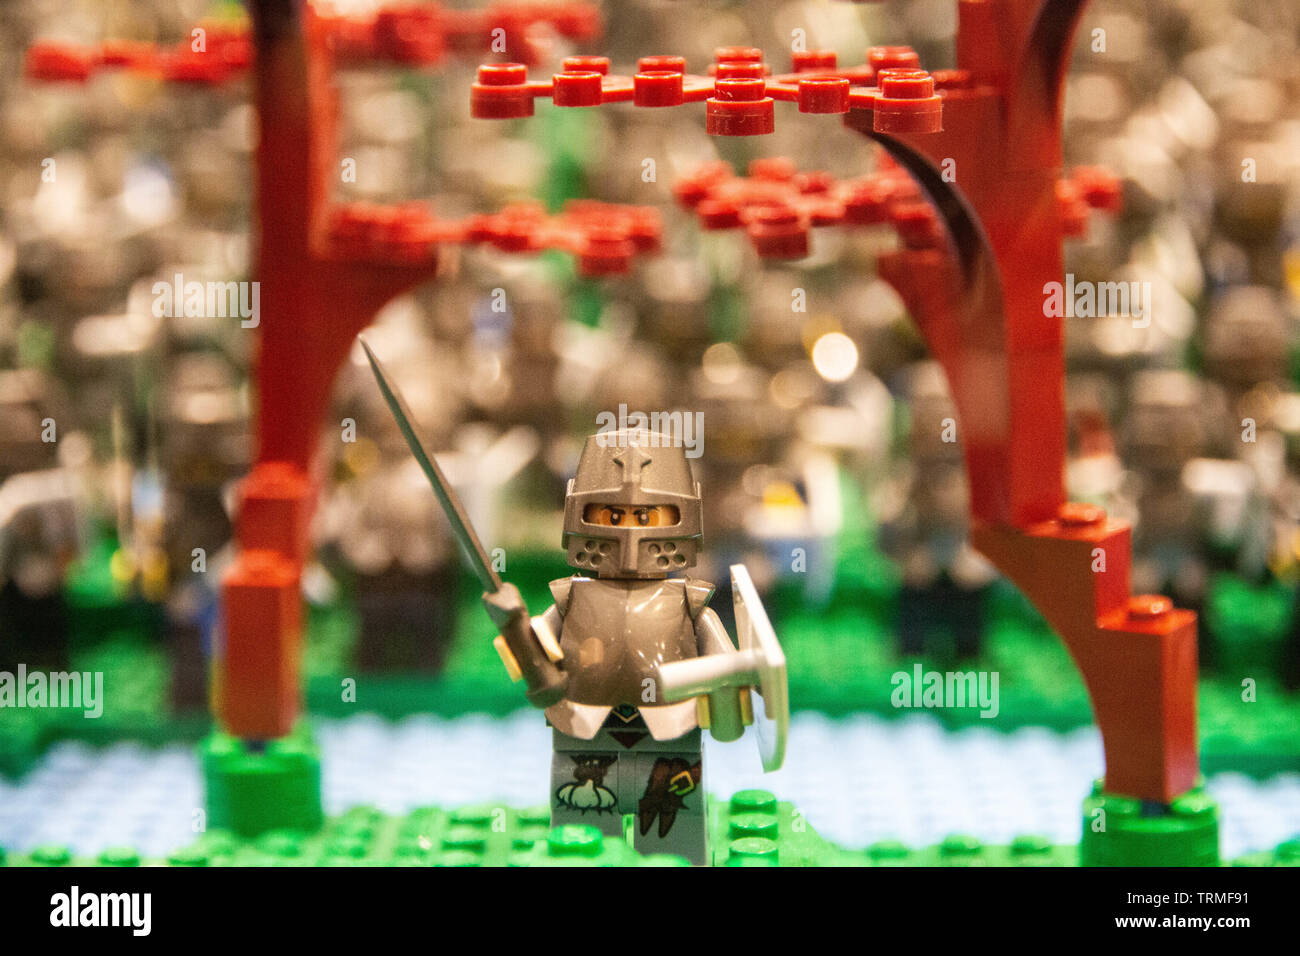 Lego Army High Resolution Stock Photography and Images - Alamy